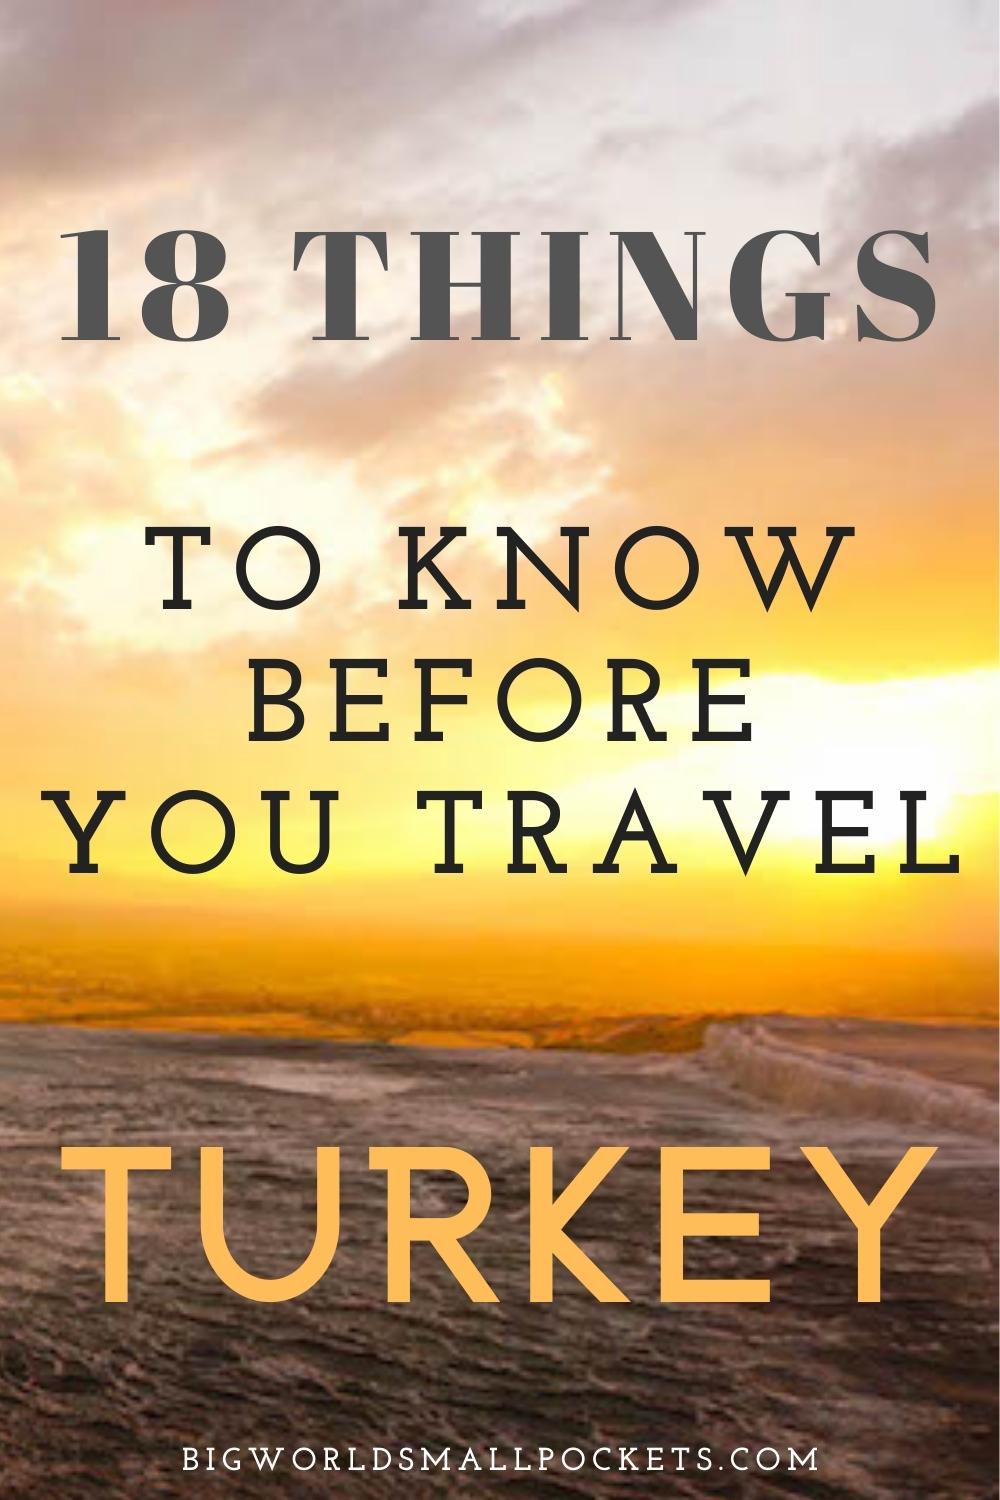 18 Things to Know Before you Travel Turkey